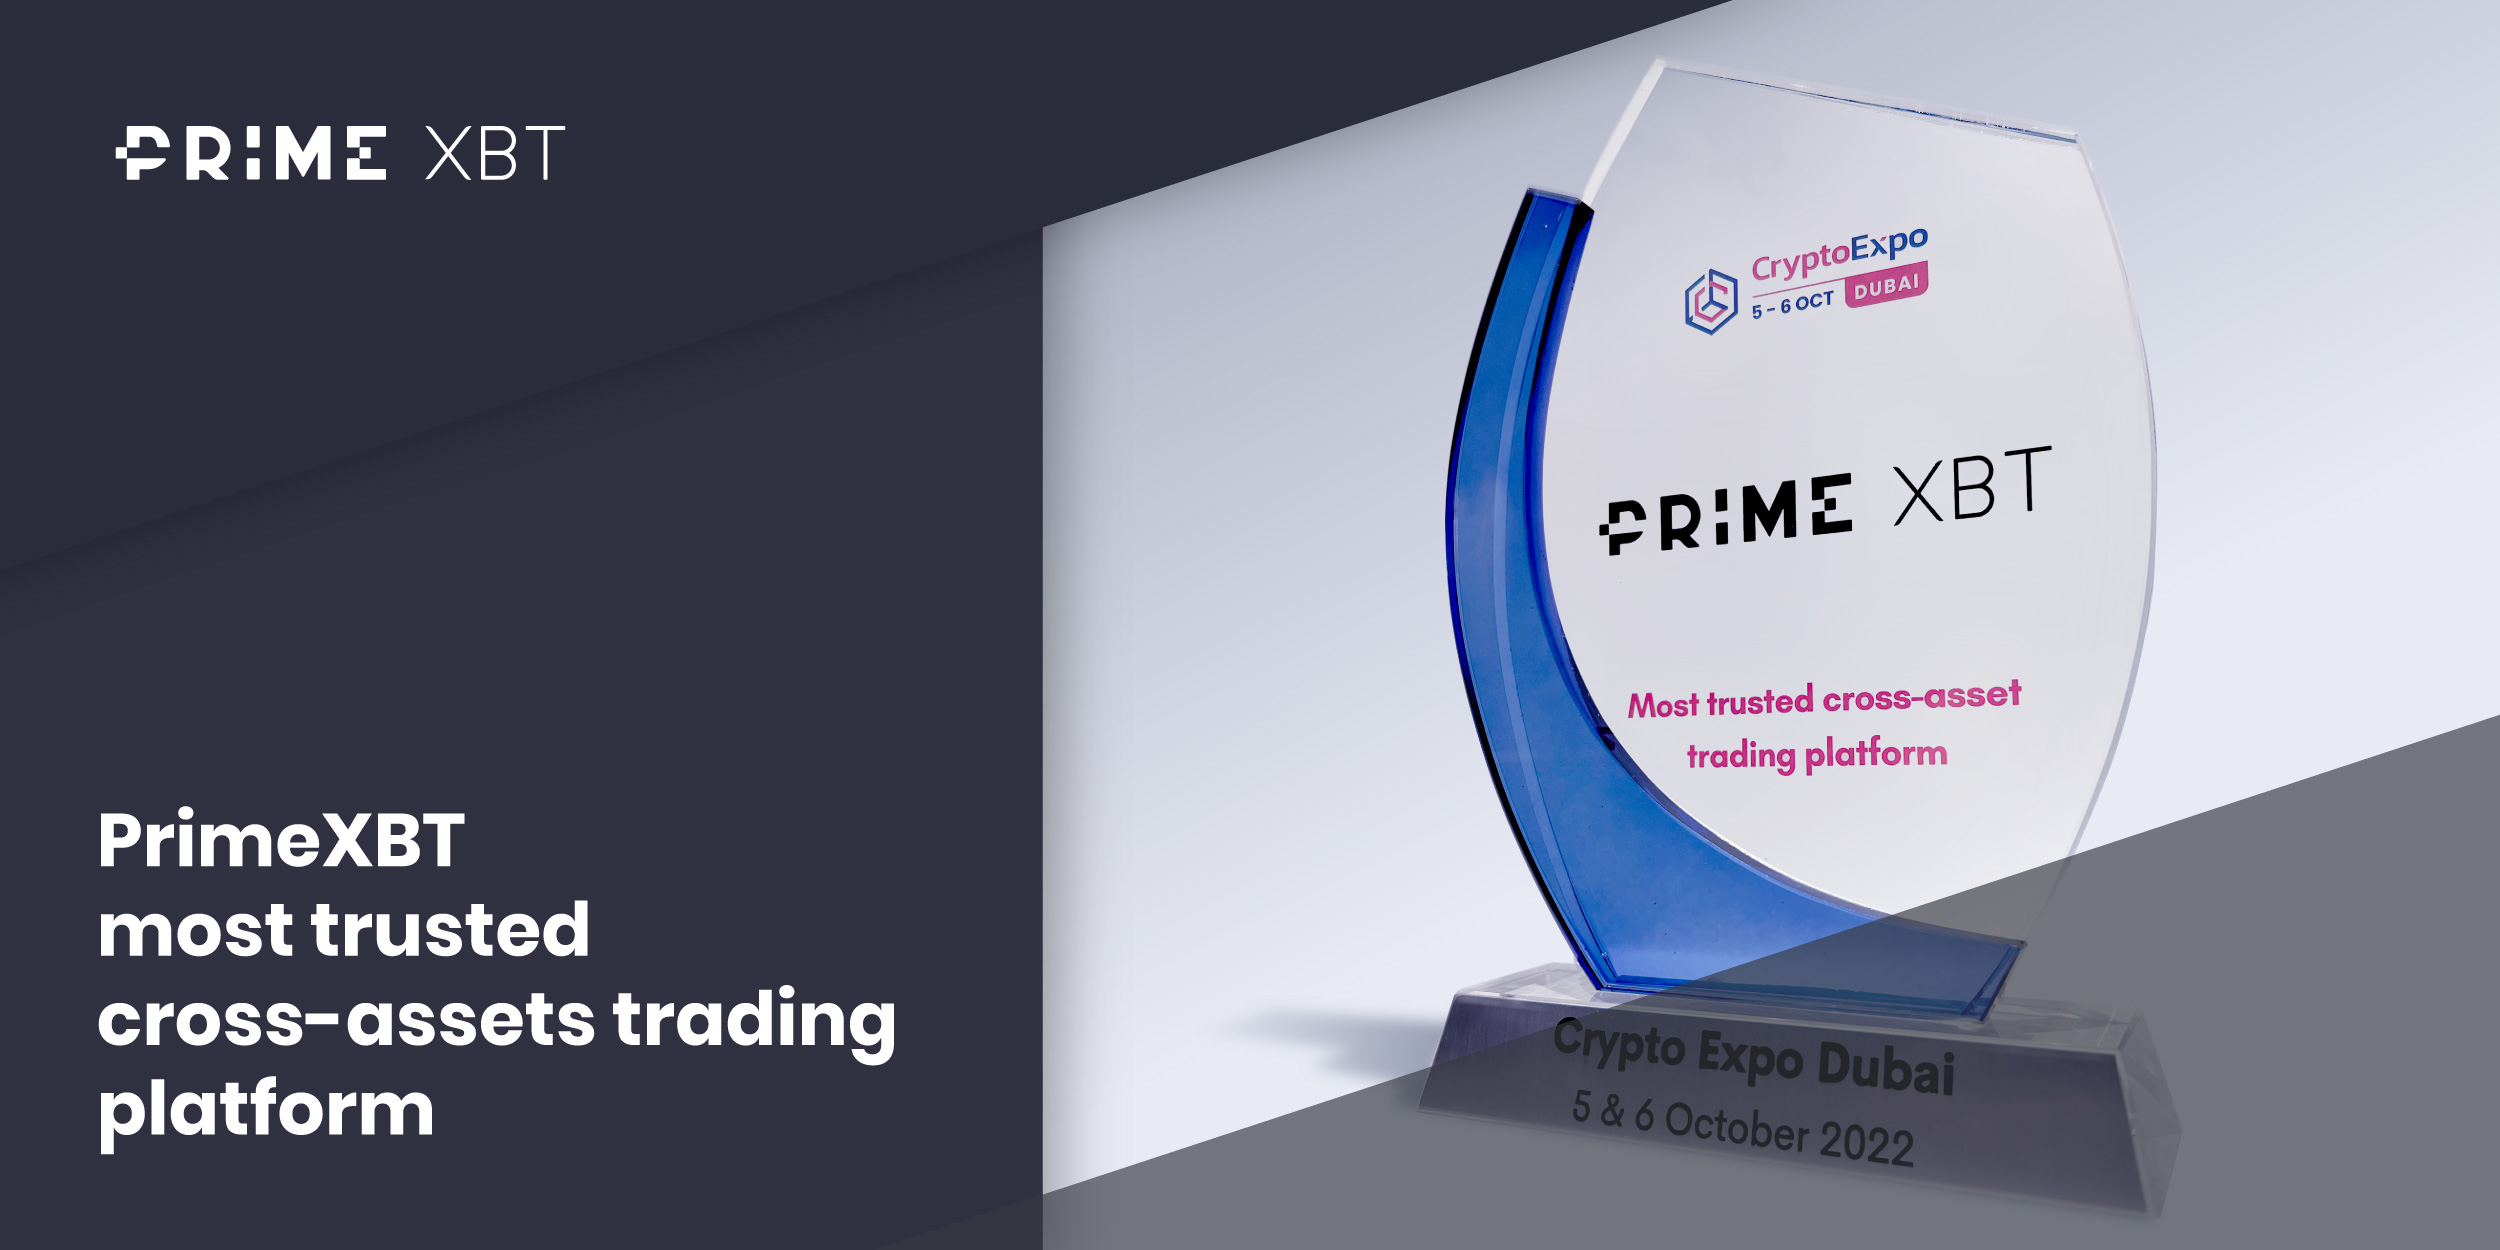 PrimeXBT Takes Home "Most Trusted Crypto-Asset Trading Platform" Award From Crypto Expo Dubai - Blog 17 10